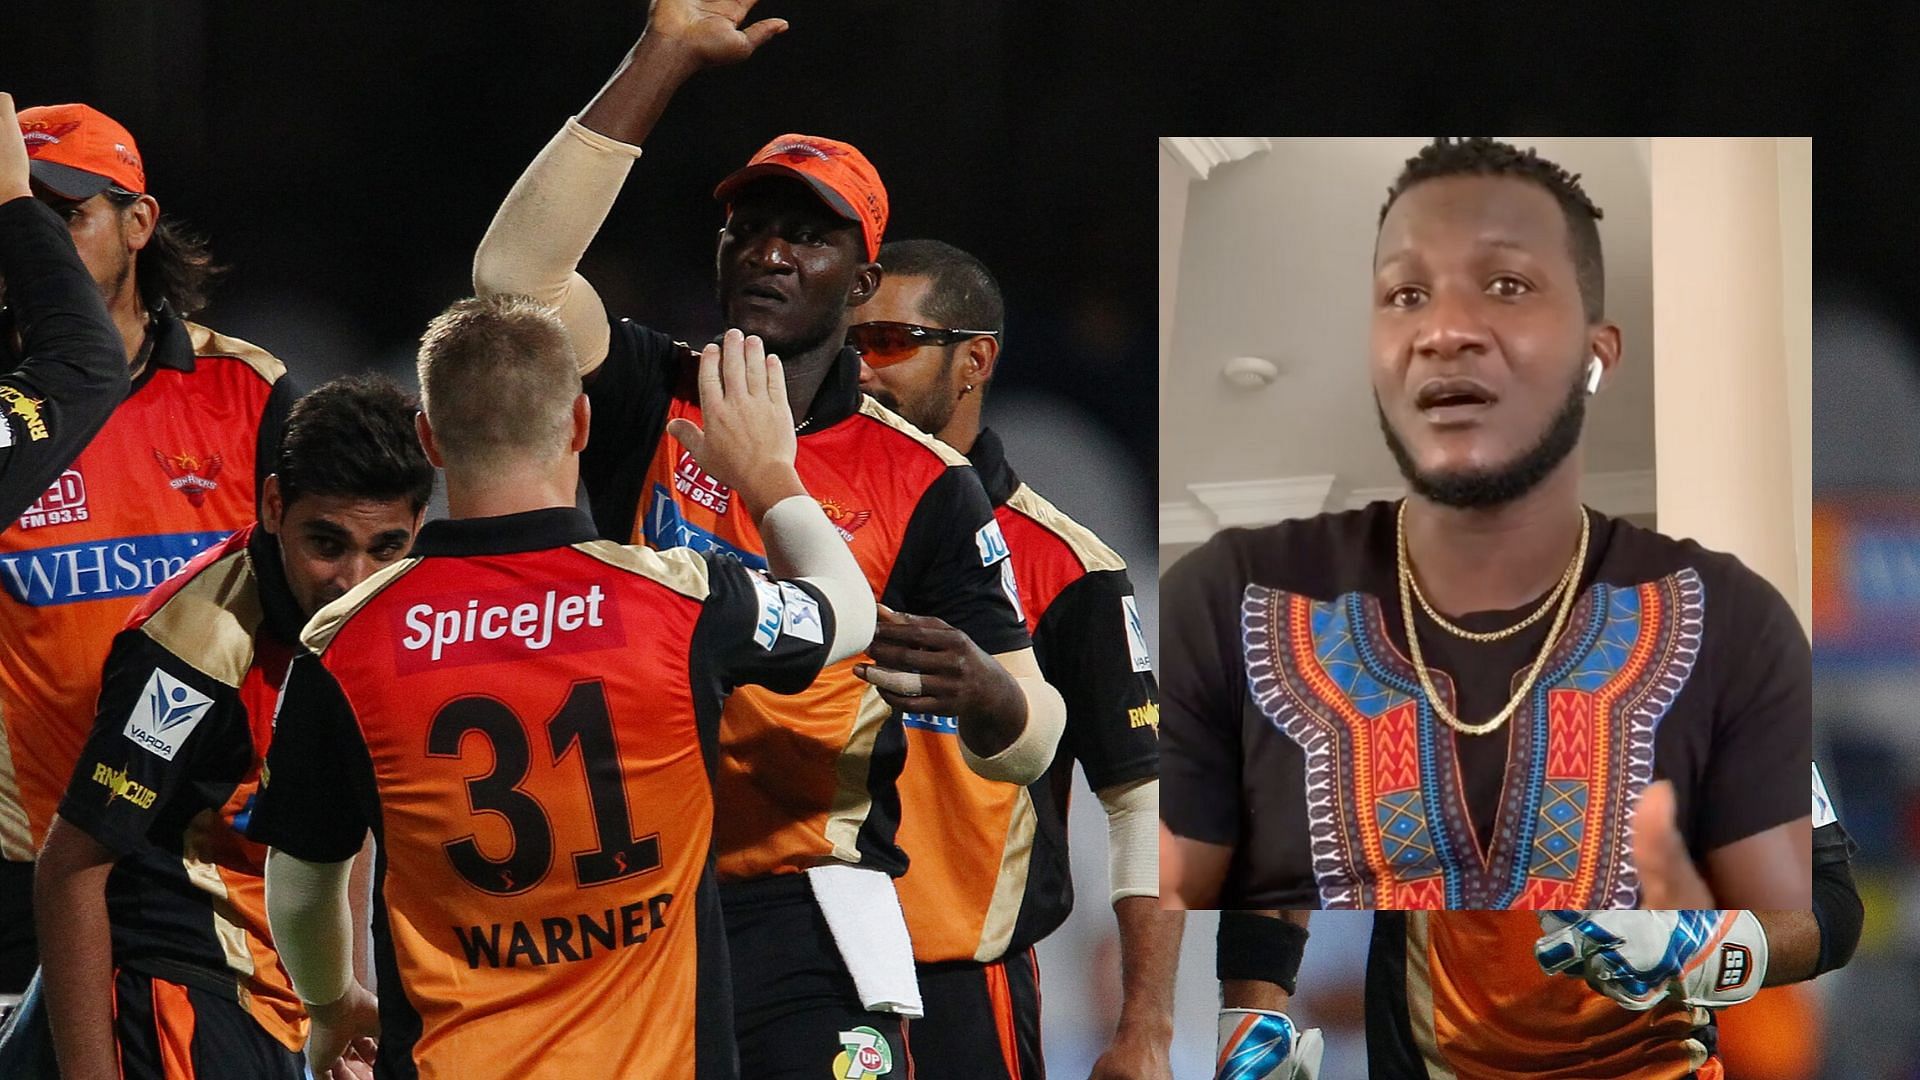 Darren Sammy has revealed that he was subjected to racial abuse in the Sunrisers Hyderabad (SRH) dressing room.